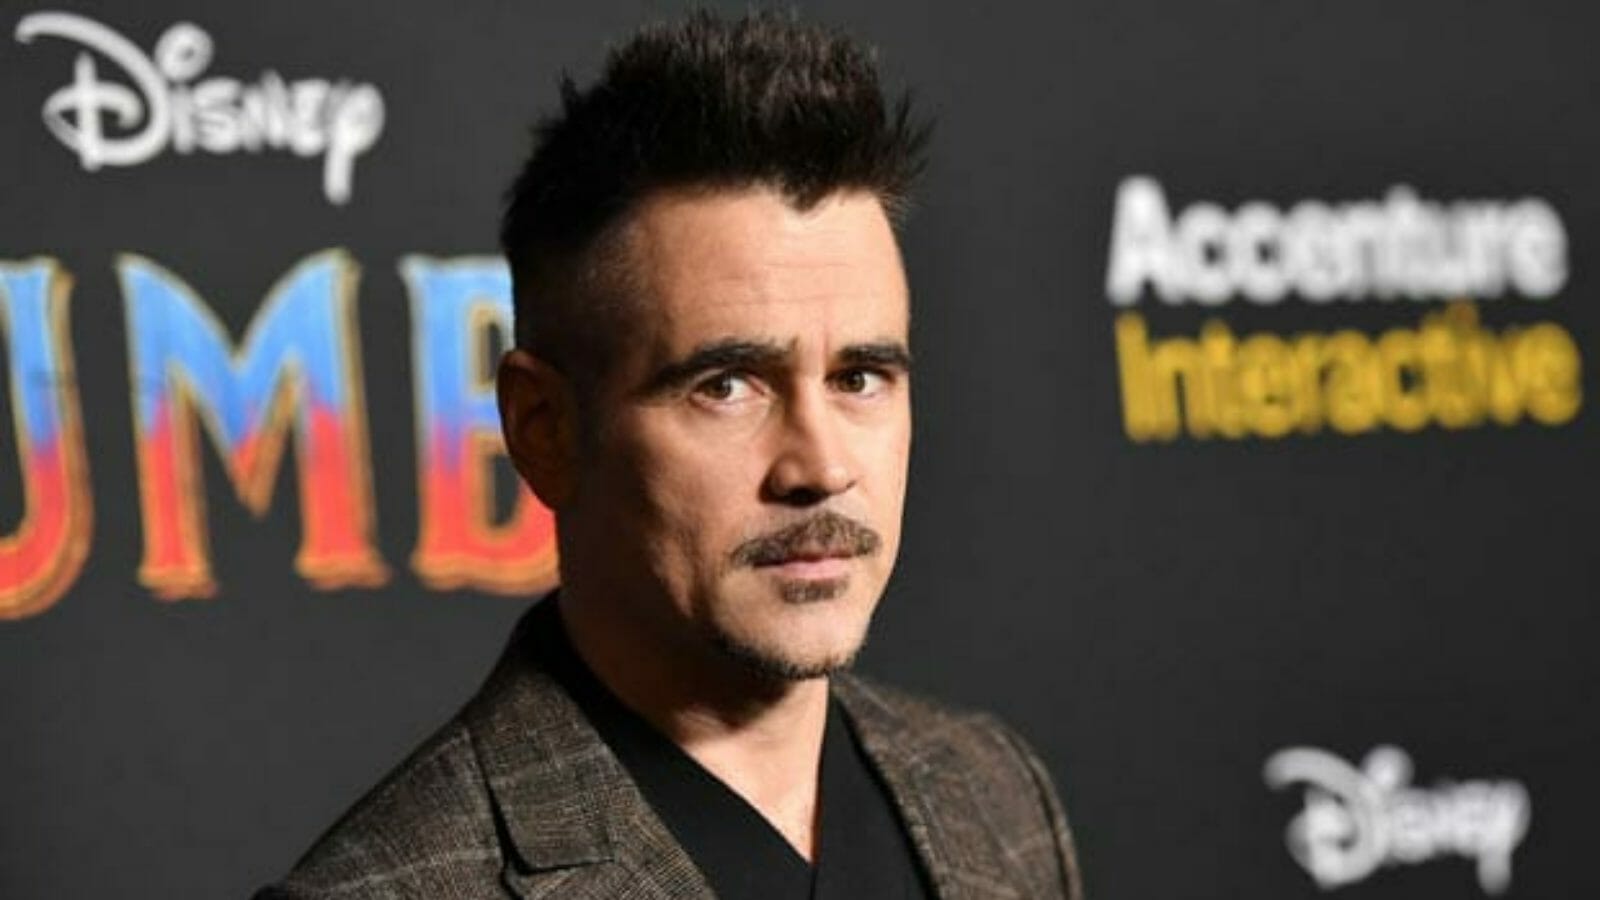 Colin Farrell will star as Penguin in the series